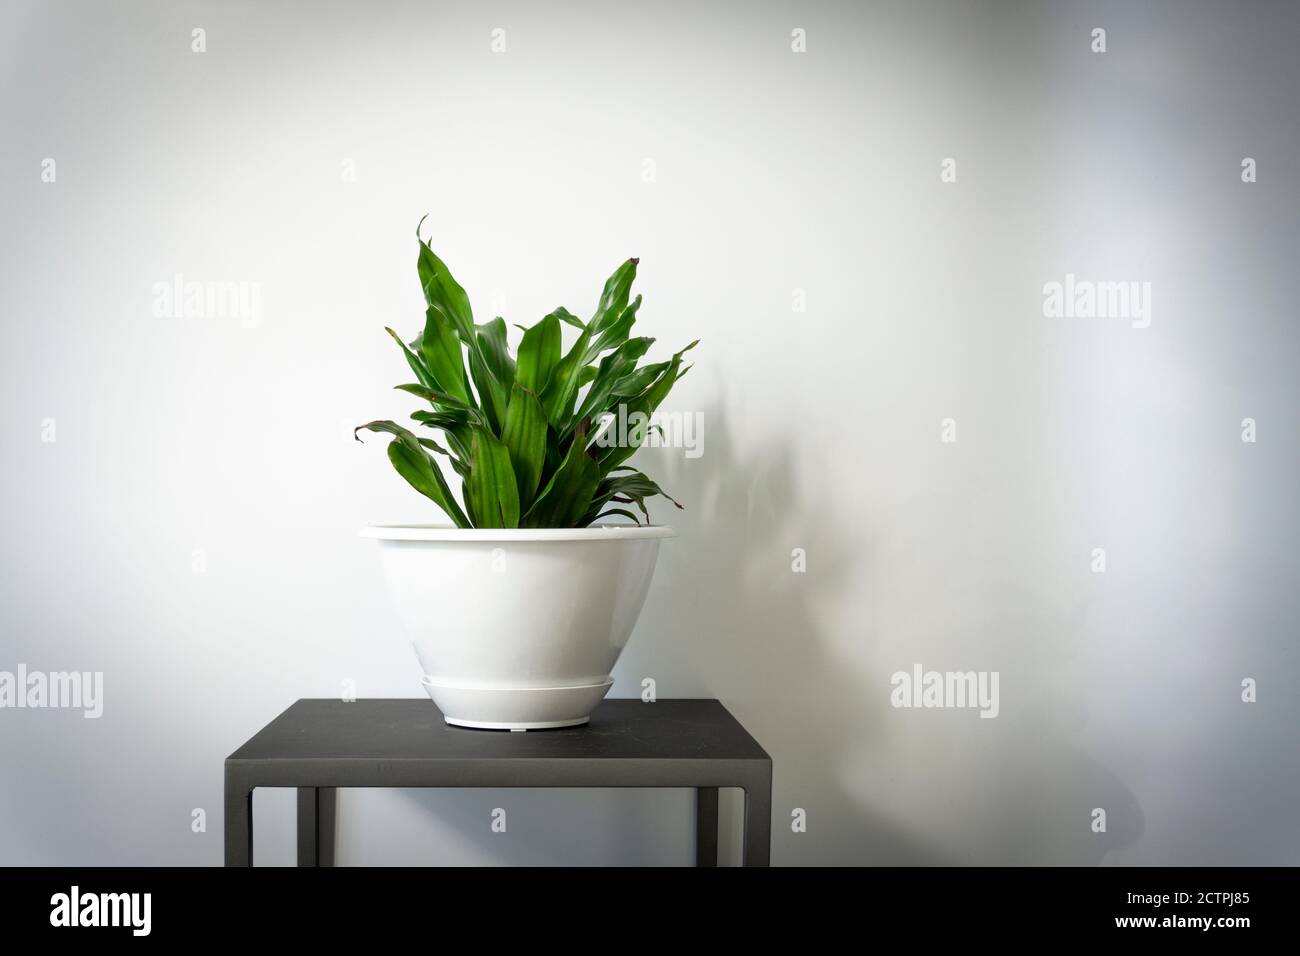 Studio shot of an indoor corn plant on a stand against white wall background for text Stock Photo